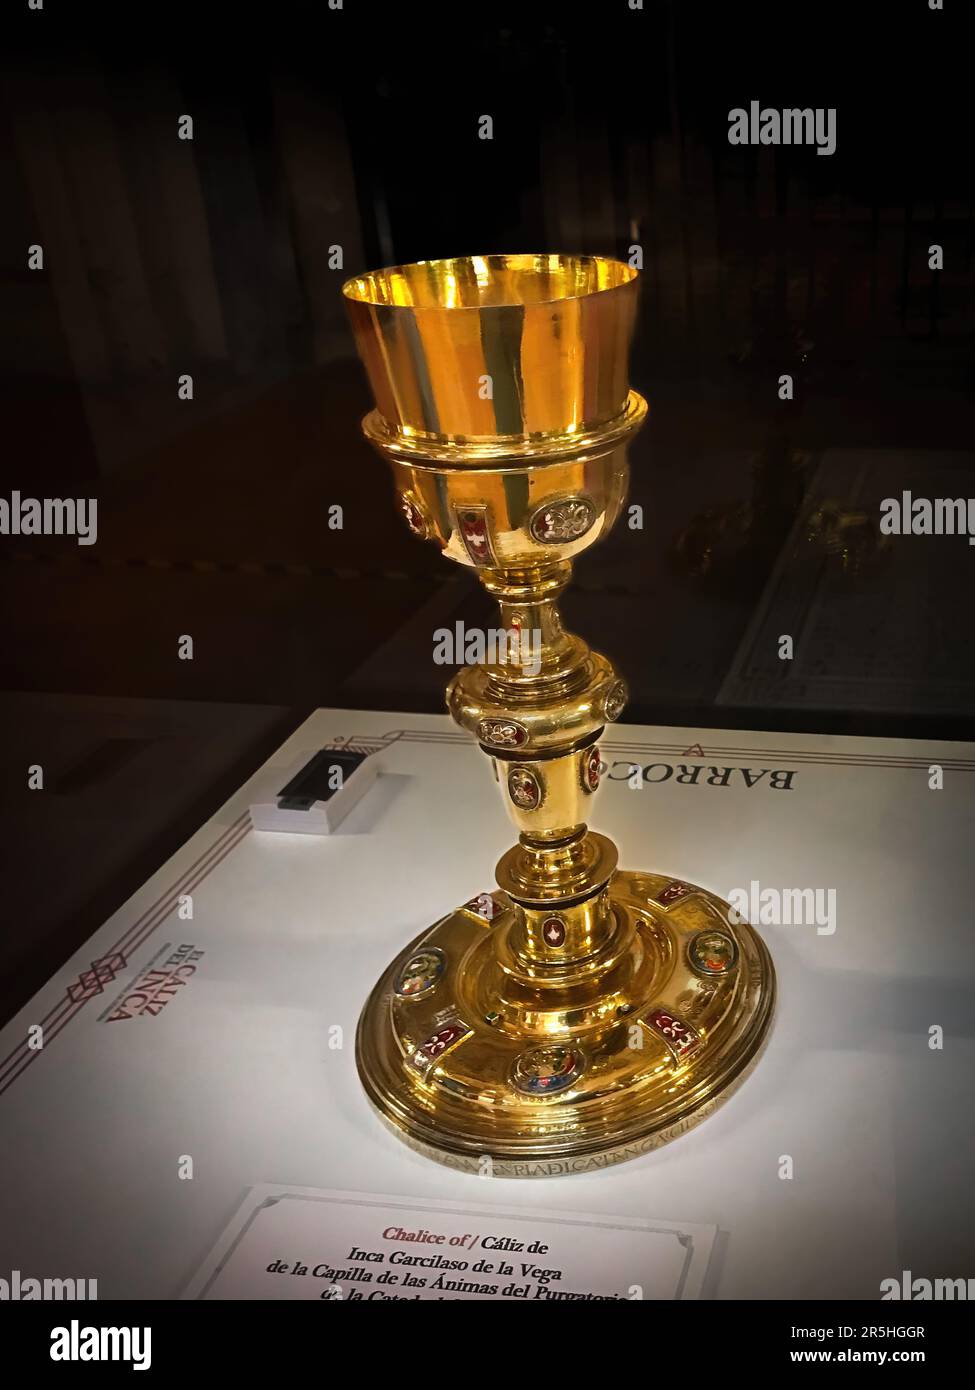 Chalice of the Inca - 17th century goblet - Cordoba, Andalusia, Spain Stock Photo